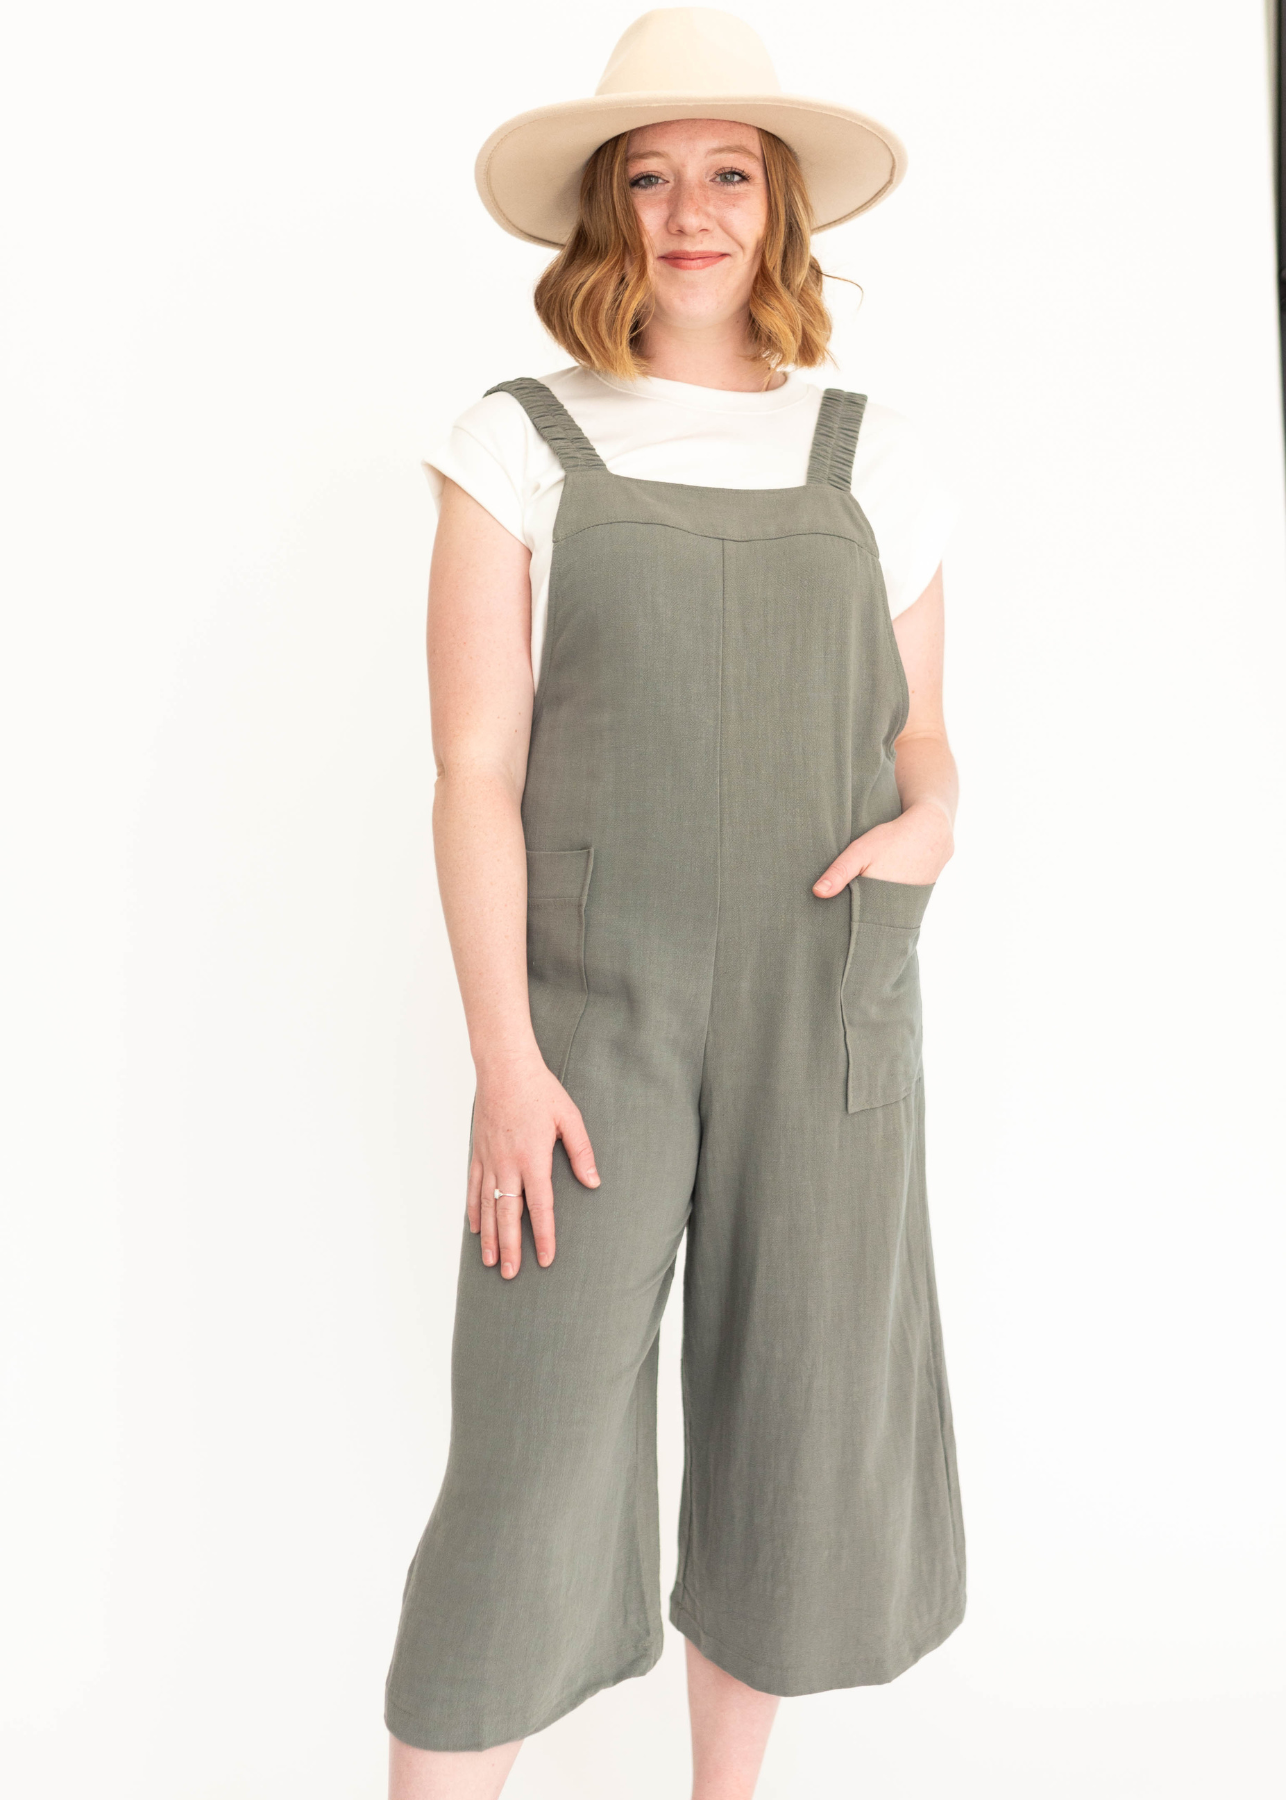 Medium olive green jumpsuit with pockets